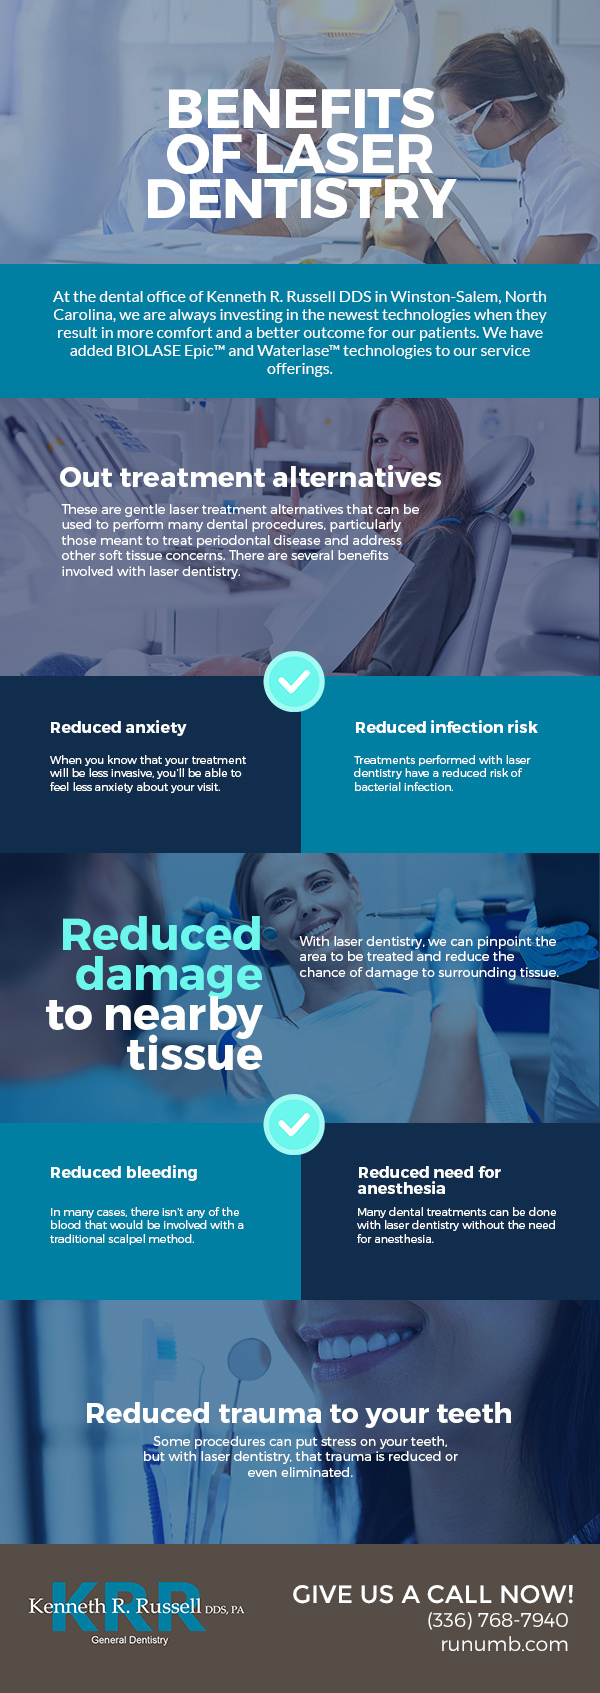 Benefits of Laser Dentistry [infographic]